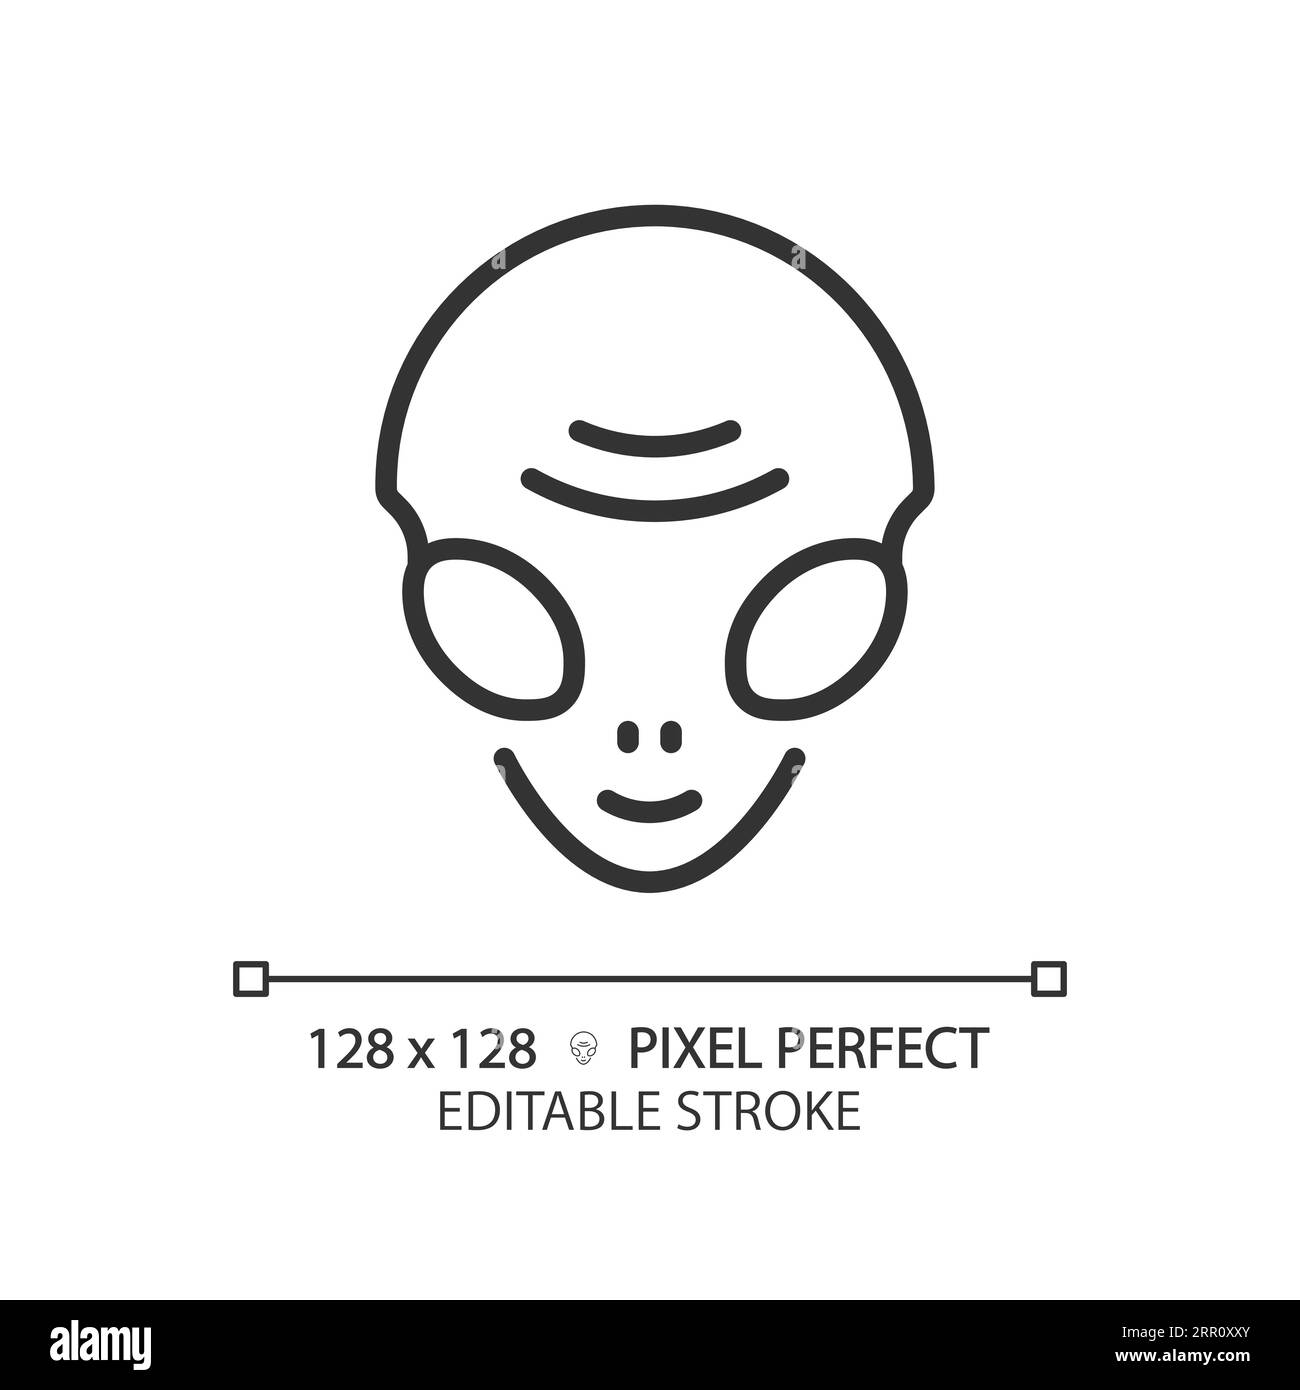 Alien face pixel perfect linear icon Stock Vector